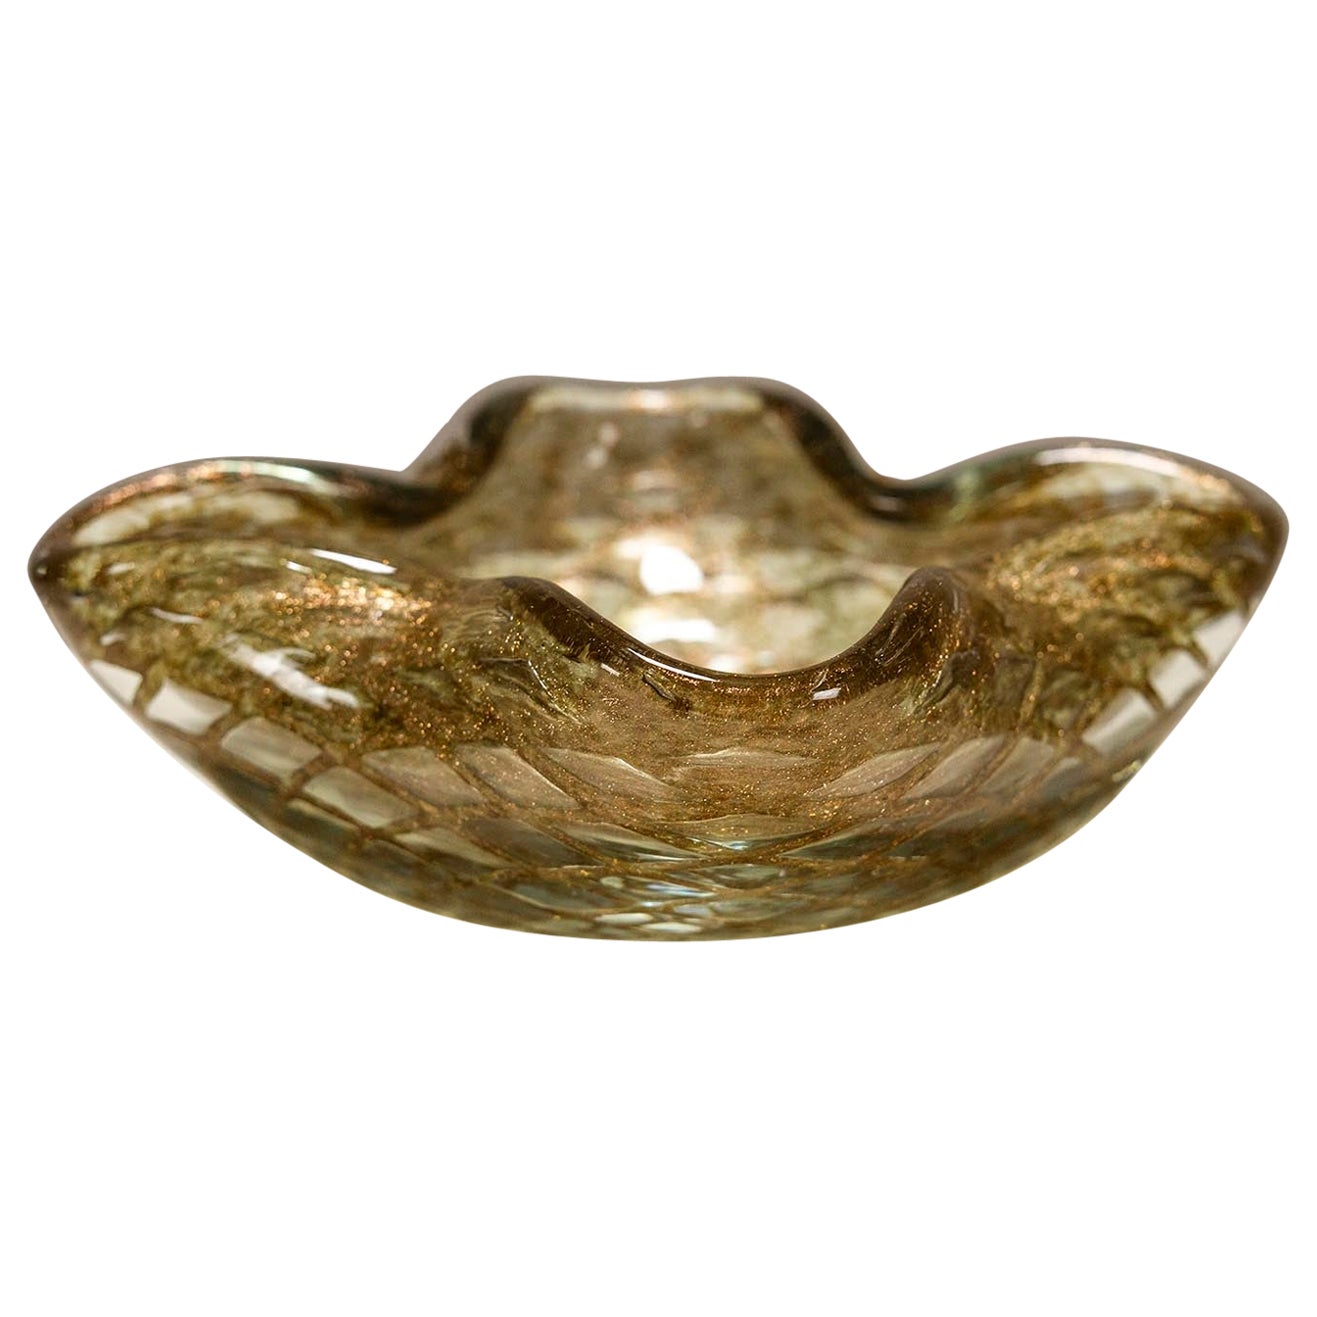 Amber-colored Murano Glass Bowl, Italy 1960s